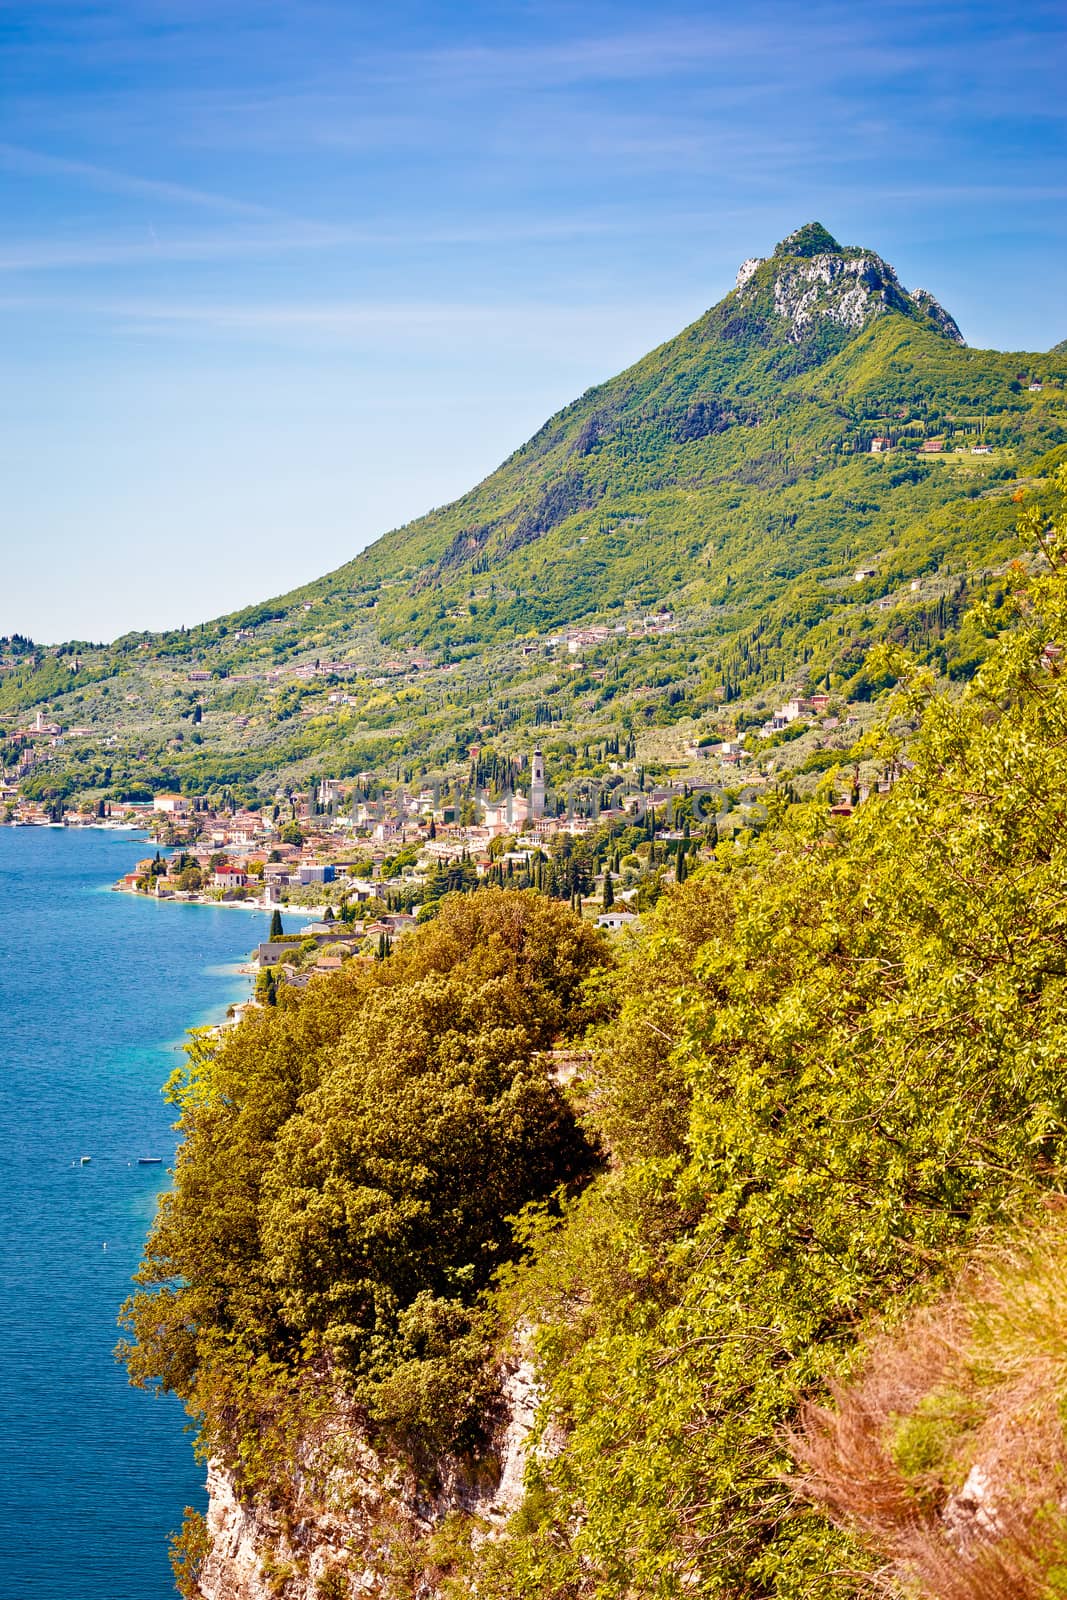 Garda lake west coast and village of Gargnano view, Lombardy region of Italy
